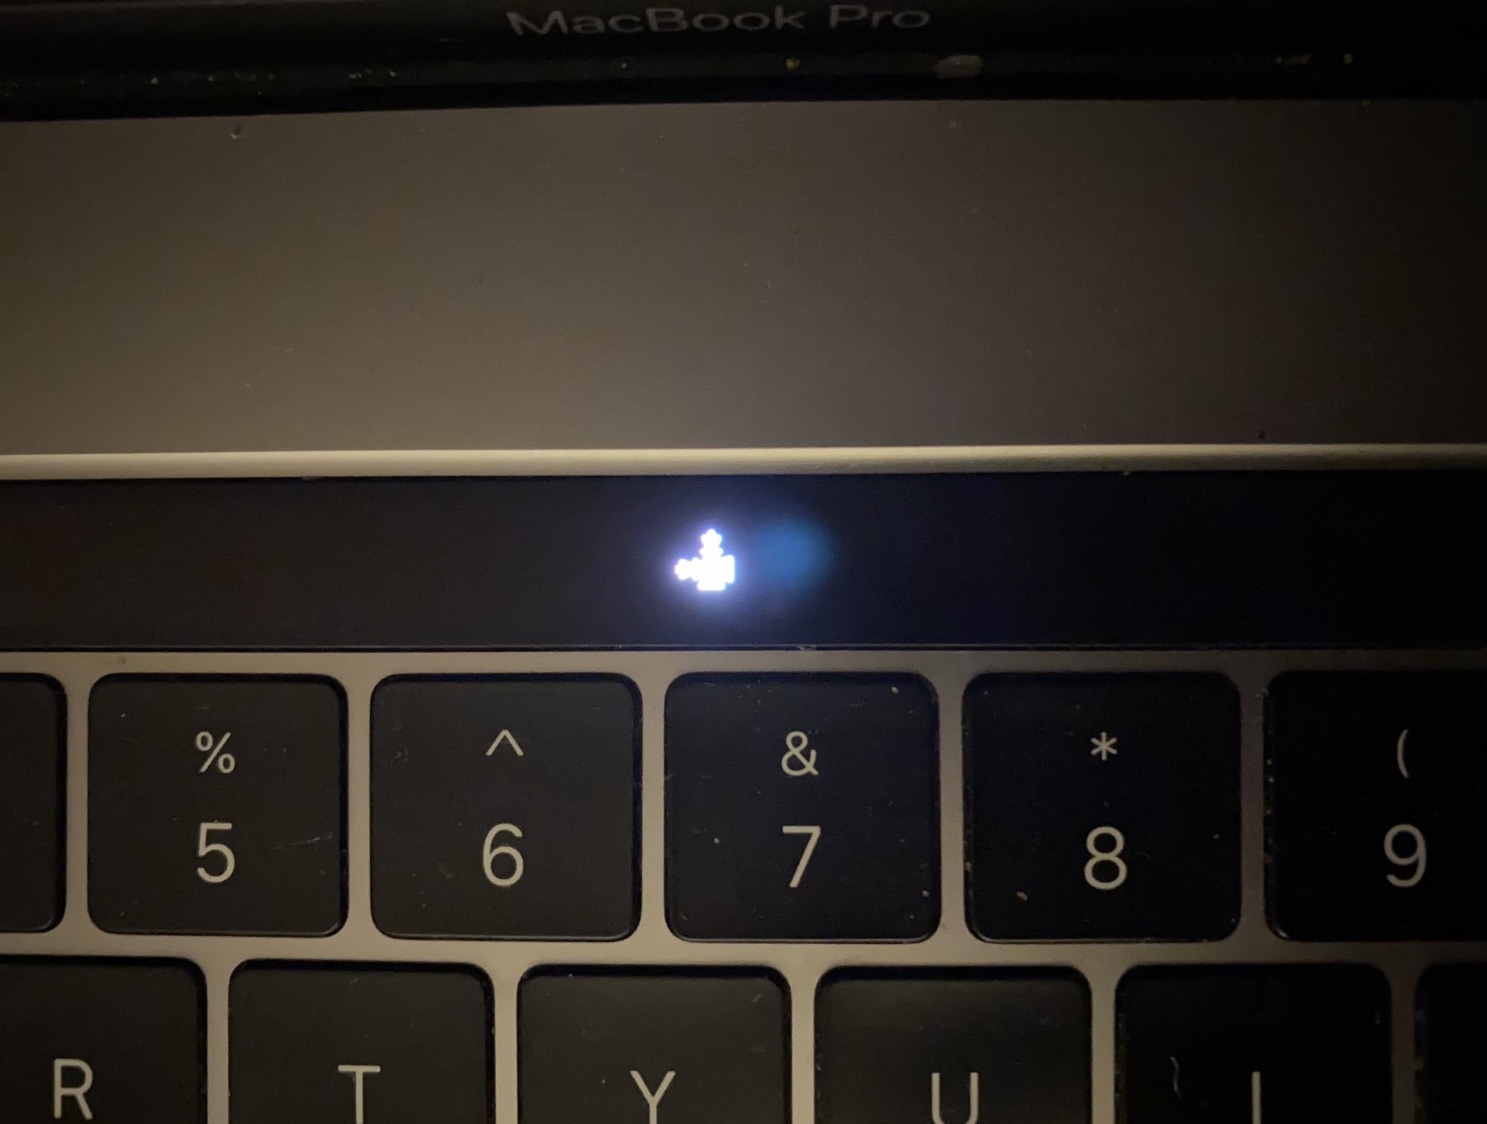 Luca Todesco Teases Checkra1n Hacks On A T2 Equipped Macbook Pro S